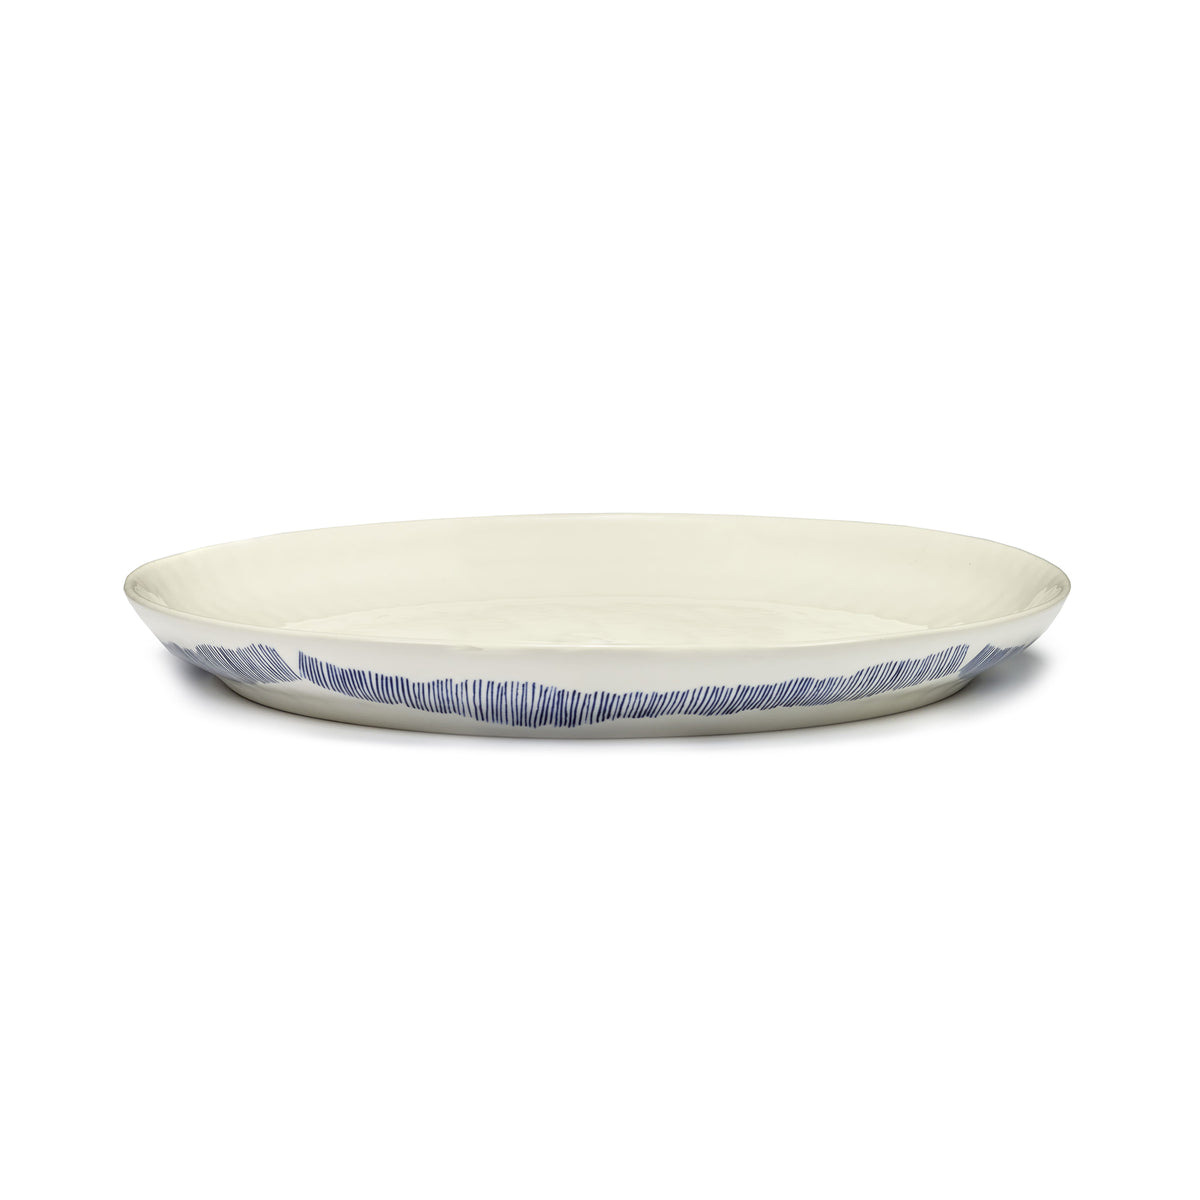 White Serving Plate with Blue Stripes - M